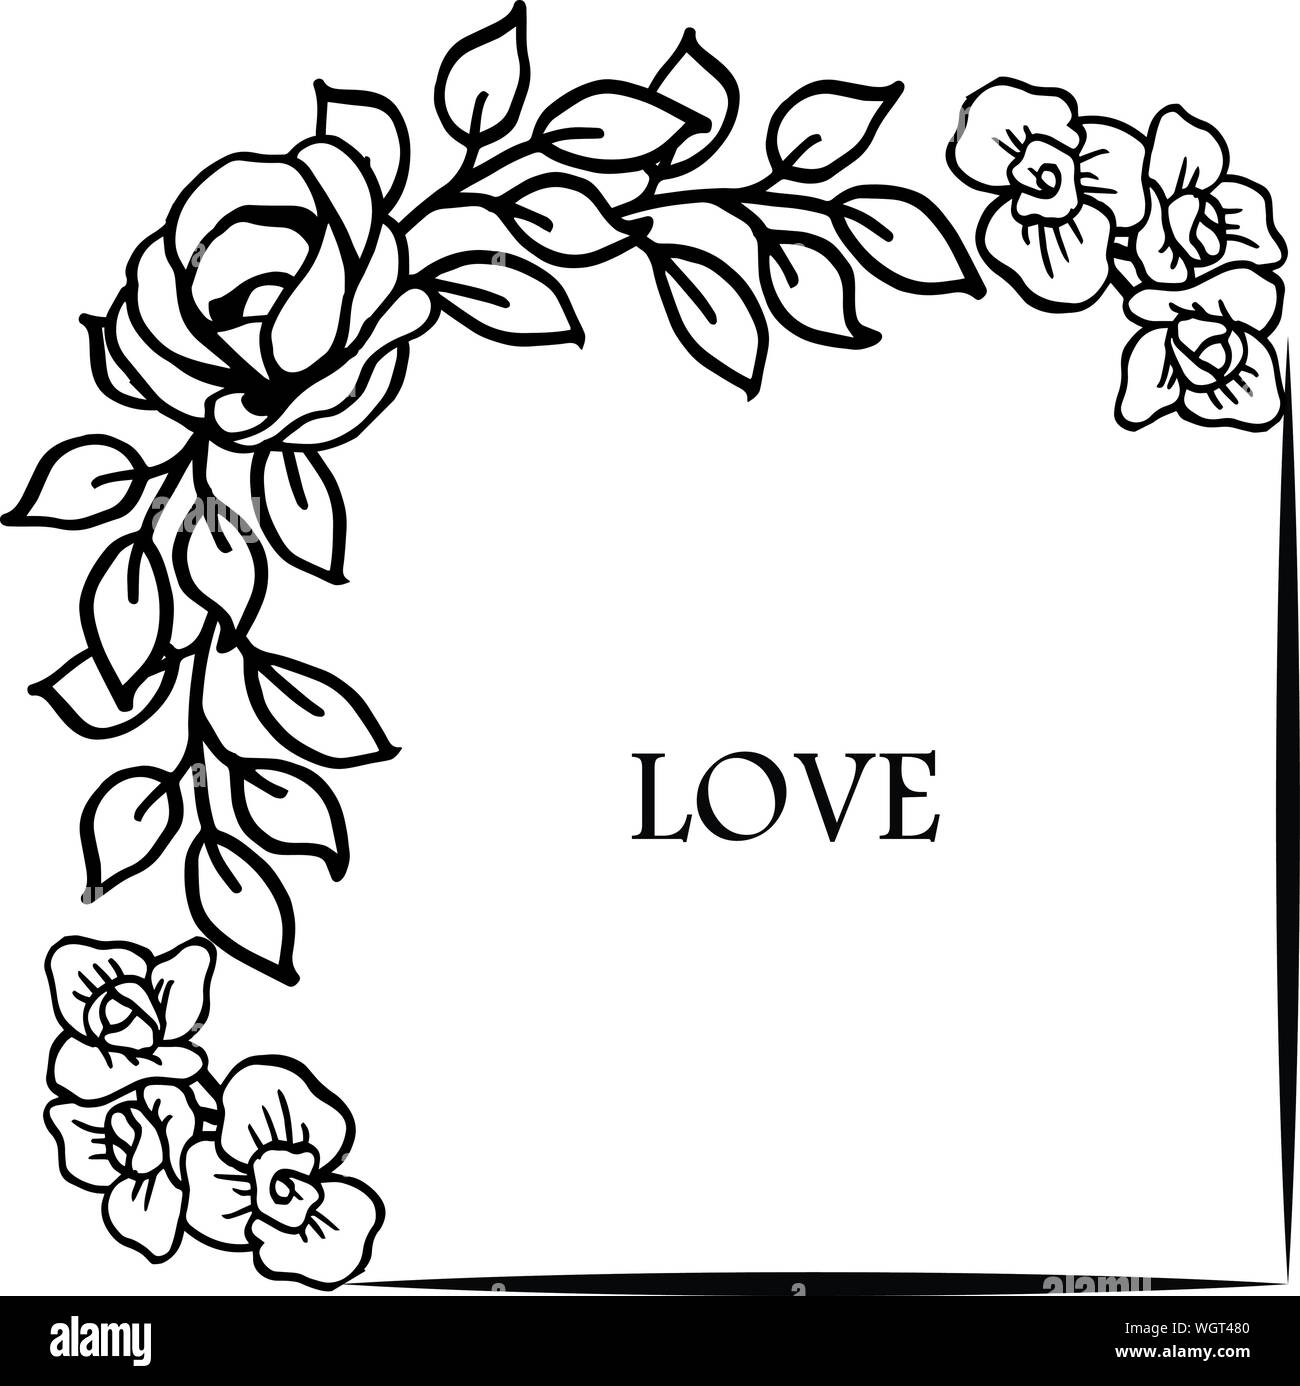 Drawing Of Leaf Flower Frame With Template Of Design Greeting Card Love Vector Stock Vector Image Art Alamy